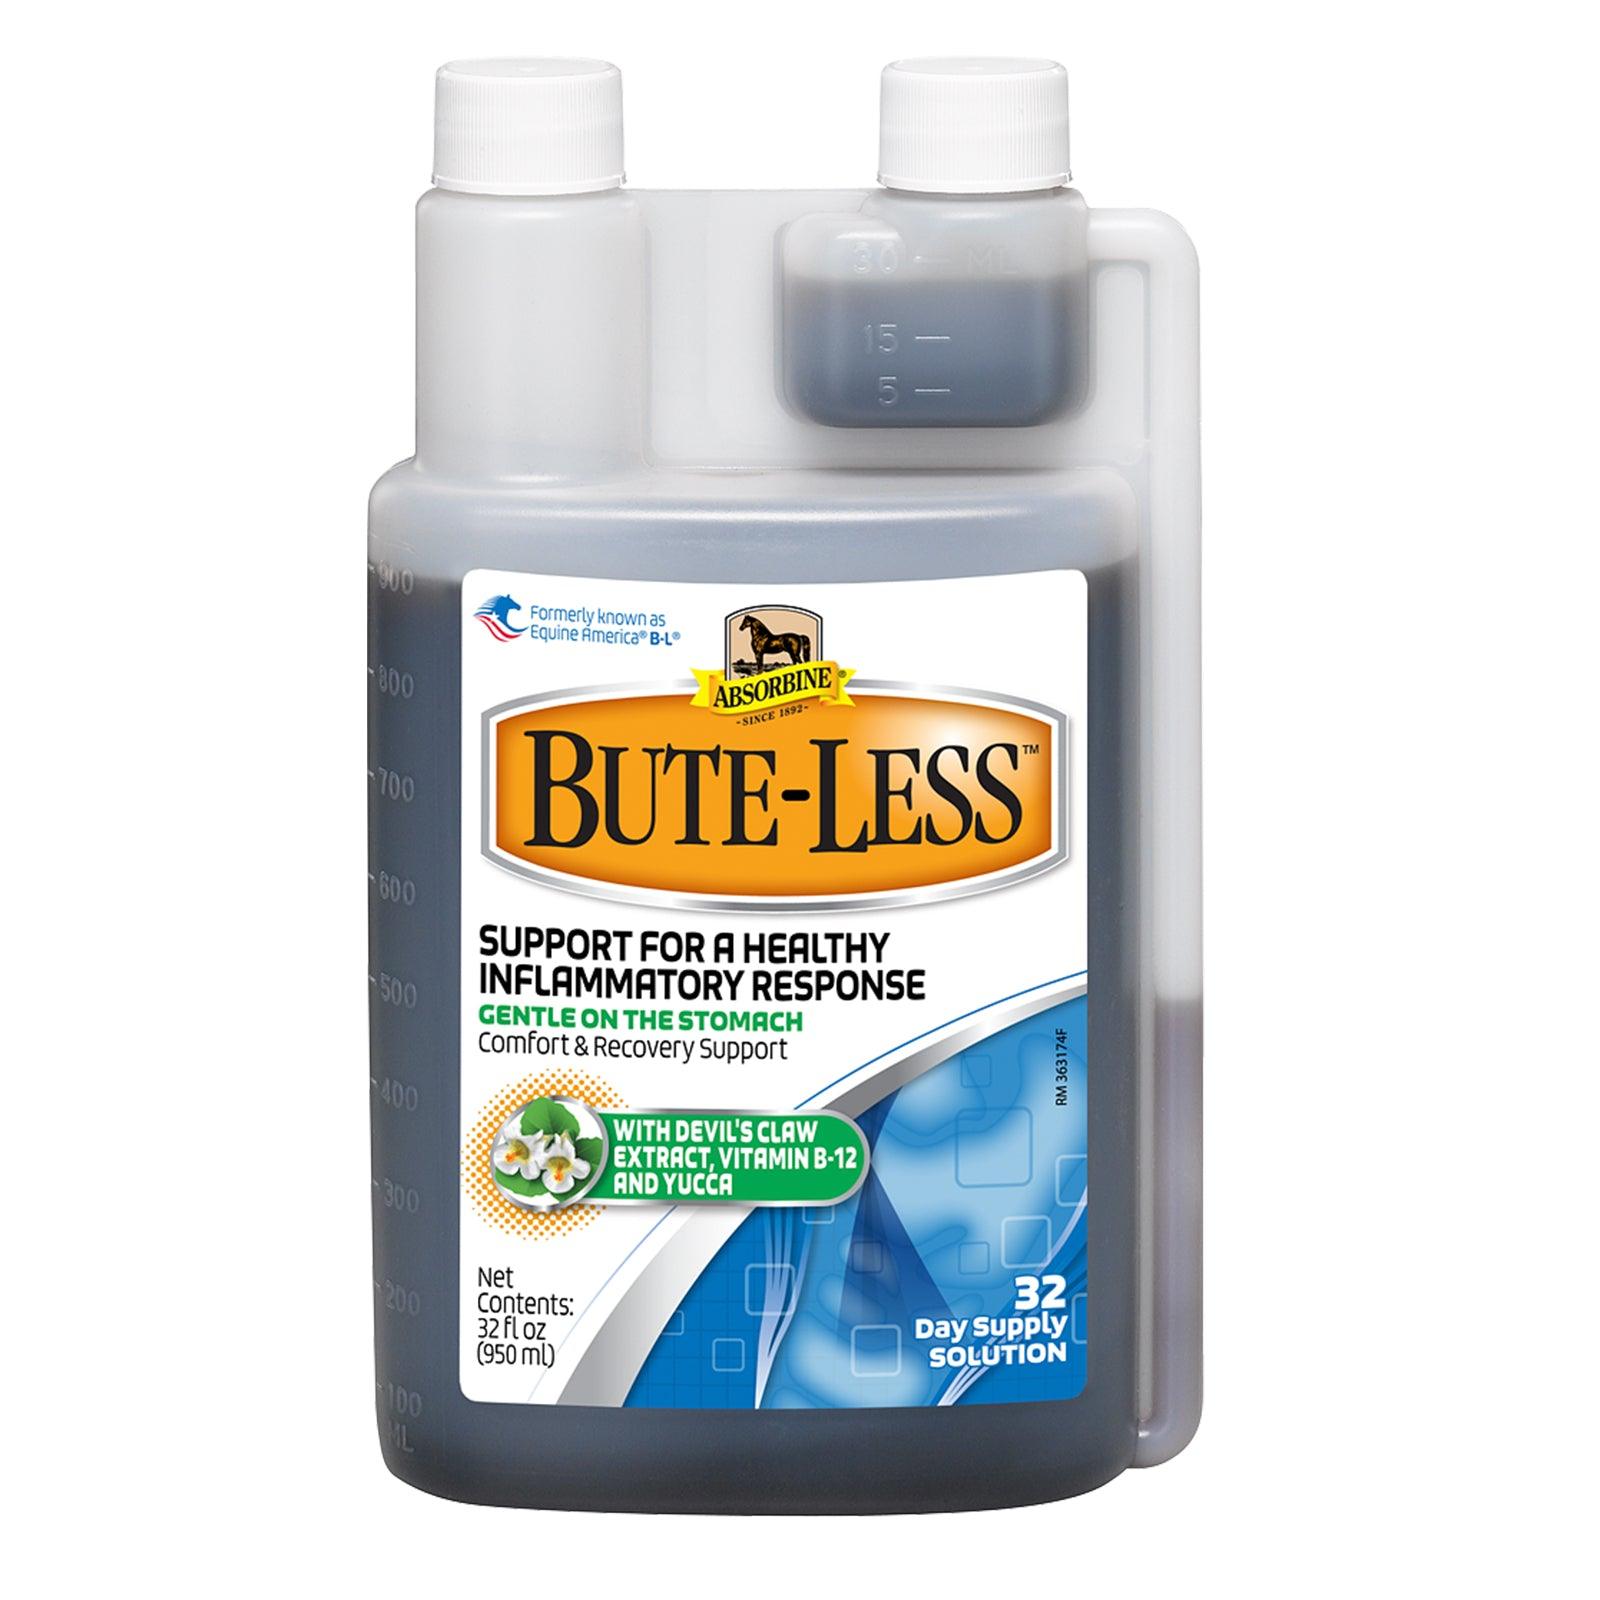 Bute-less 32 fluid oz. Solution.  Support for a healthy inflammatory response, gentle on stomach, comfort and recovery support 32 day supply solution.